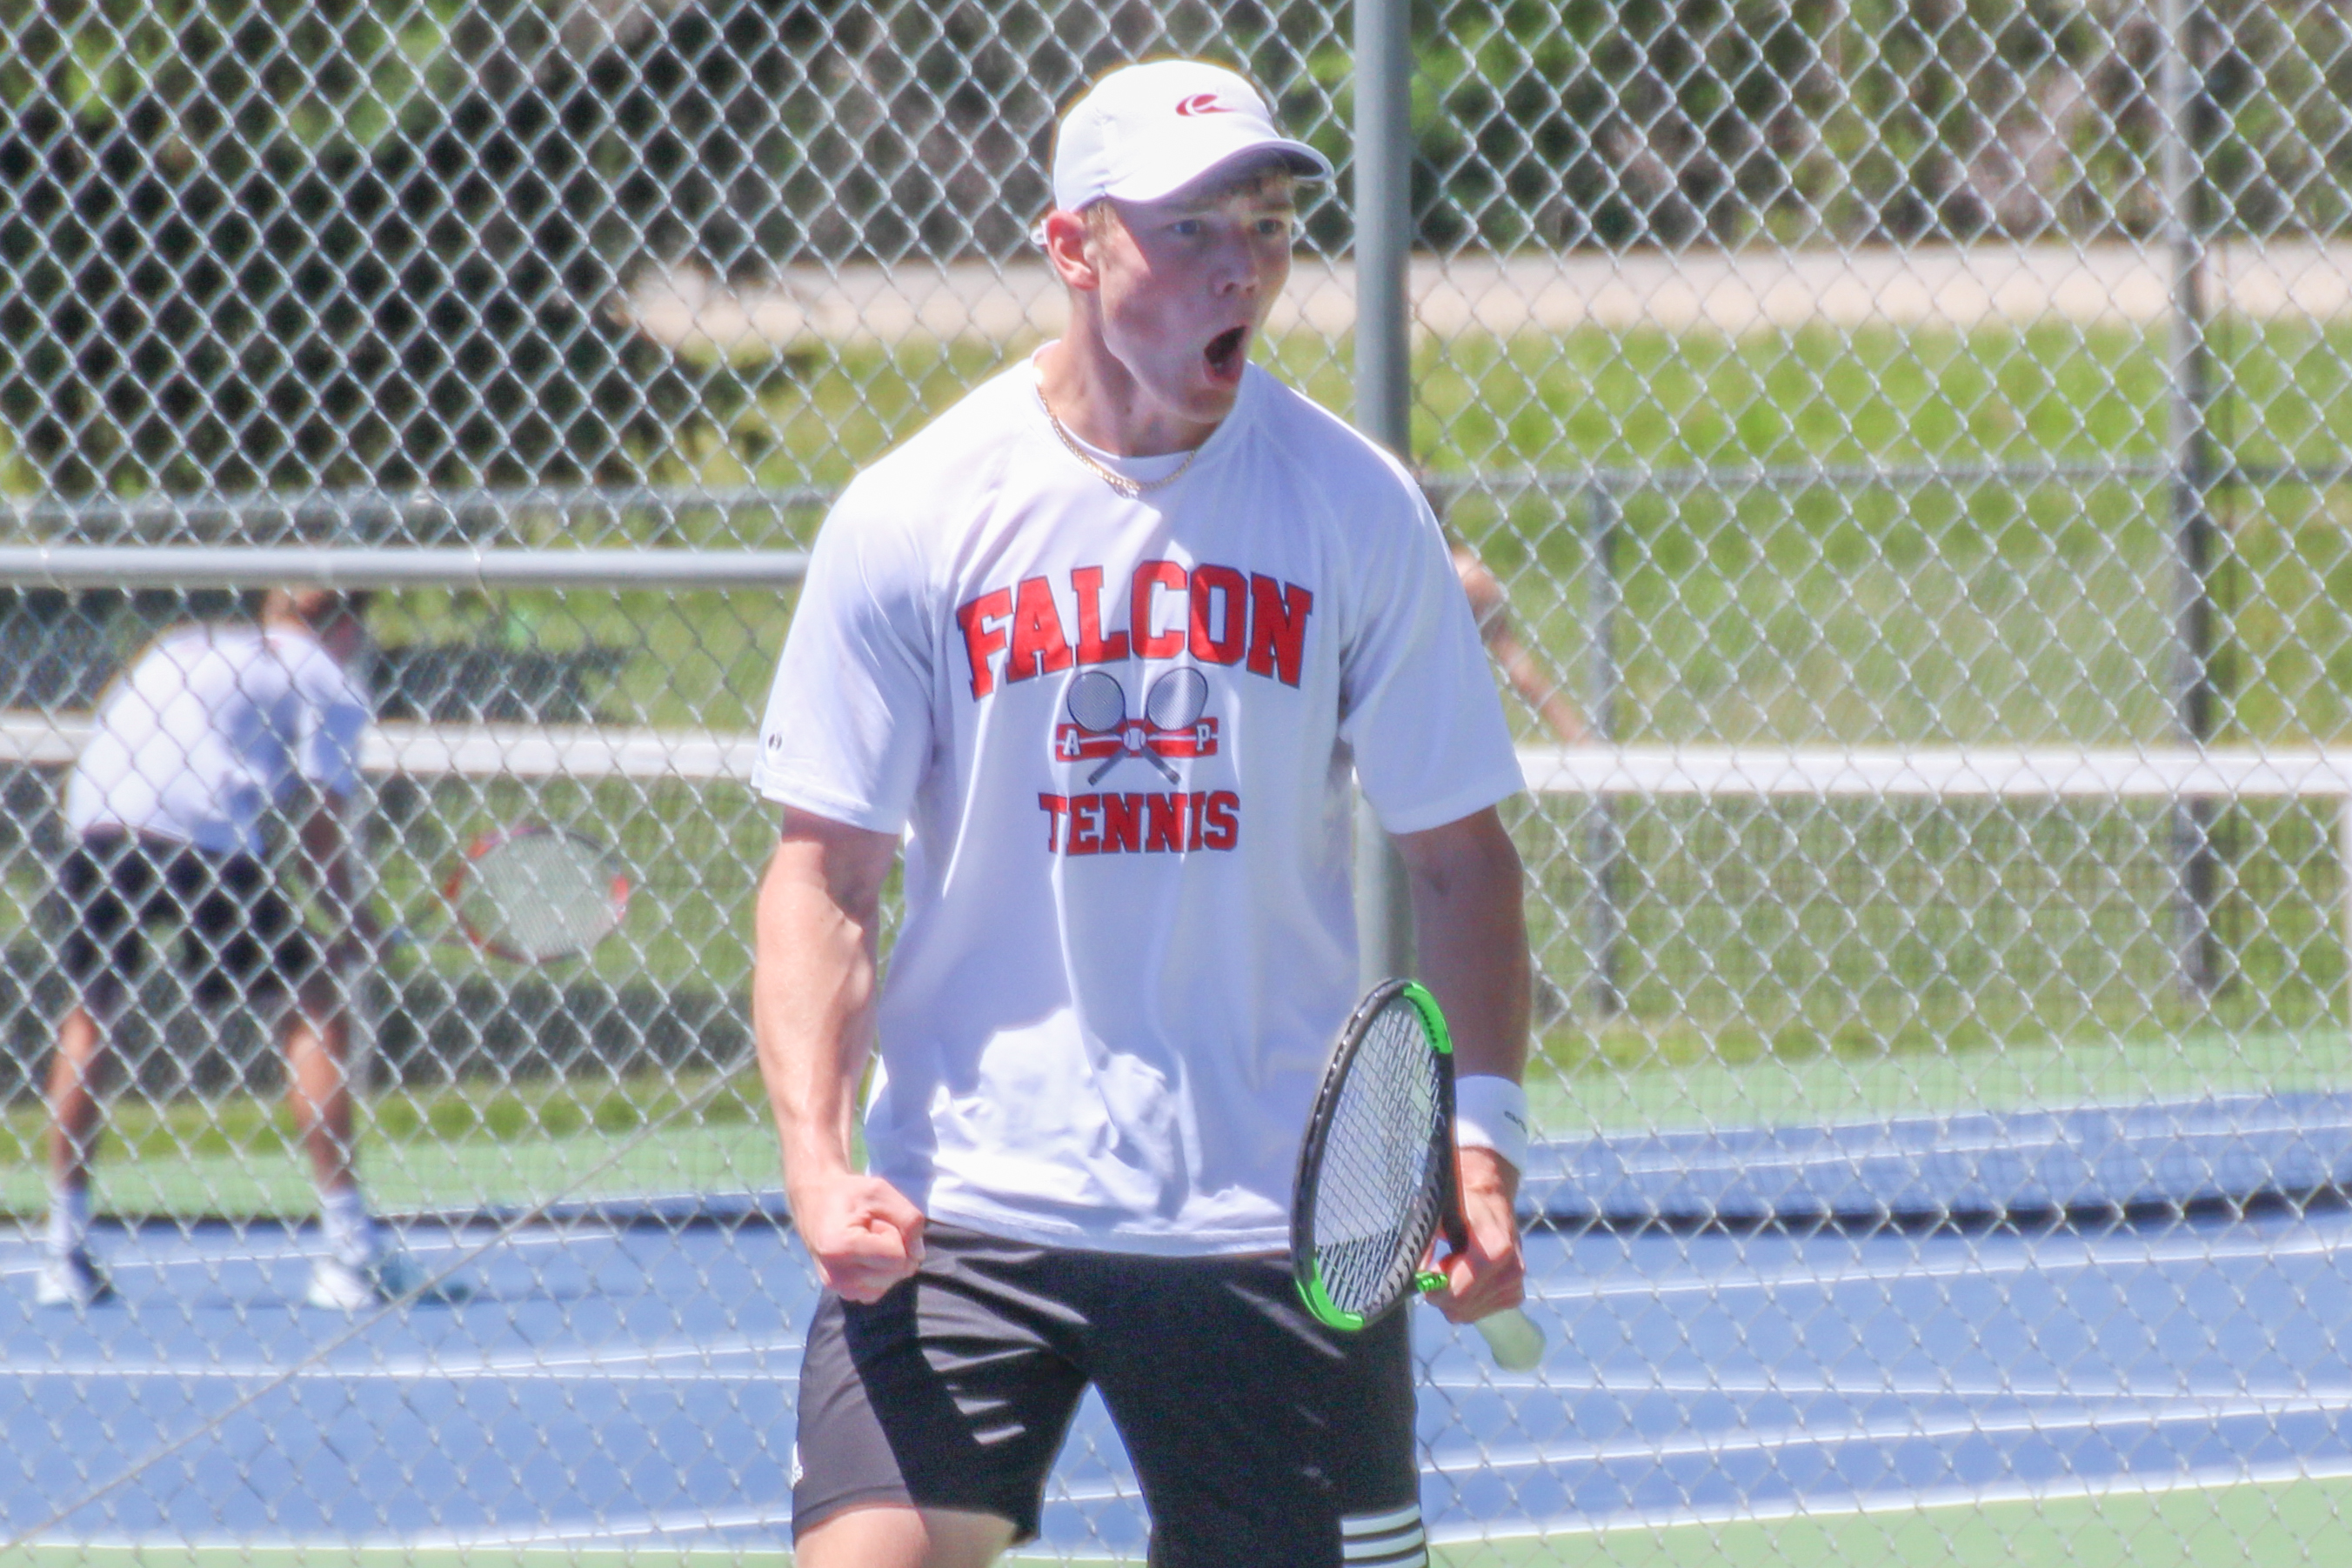 Aplington-Parkersburg senior Cameron Luhring won his second state title and completed an undefeated high school tennis career. (Jake Ryder photo)